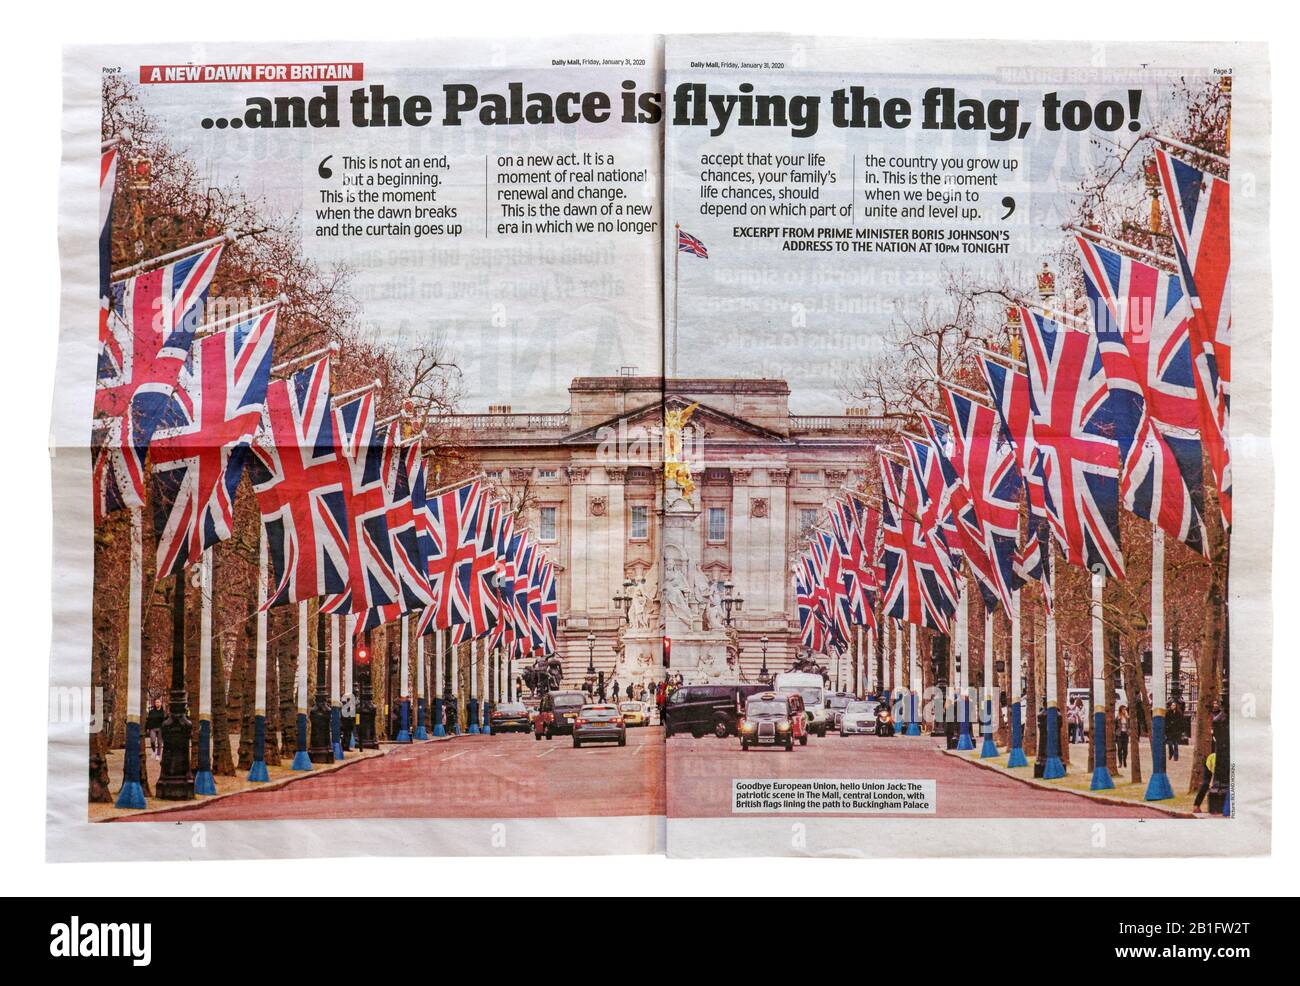 The Daily Mail vom 31. Januar 2020 mit der Brexit Headline "The Palace is Flying the Flag Too" Stockfoto